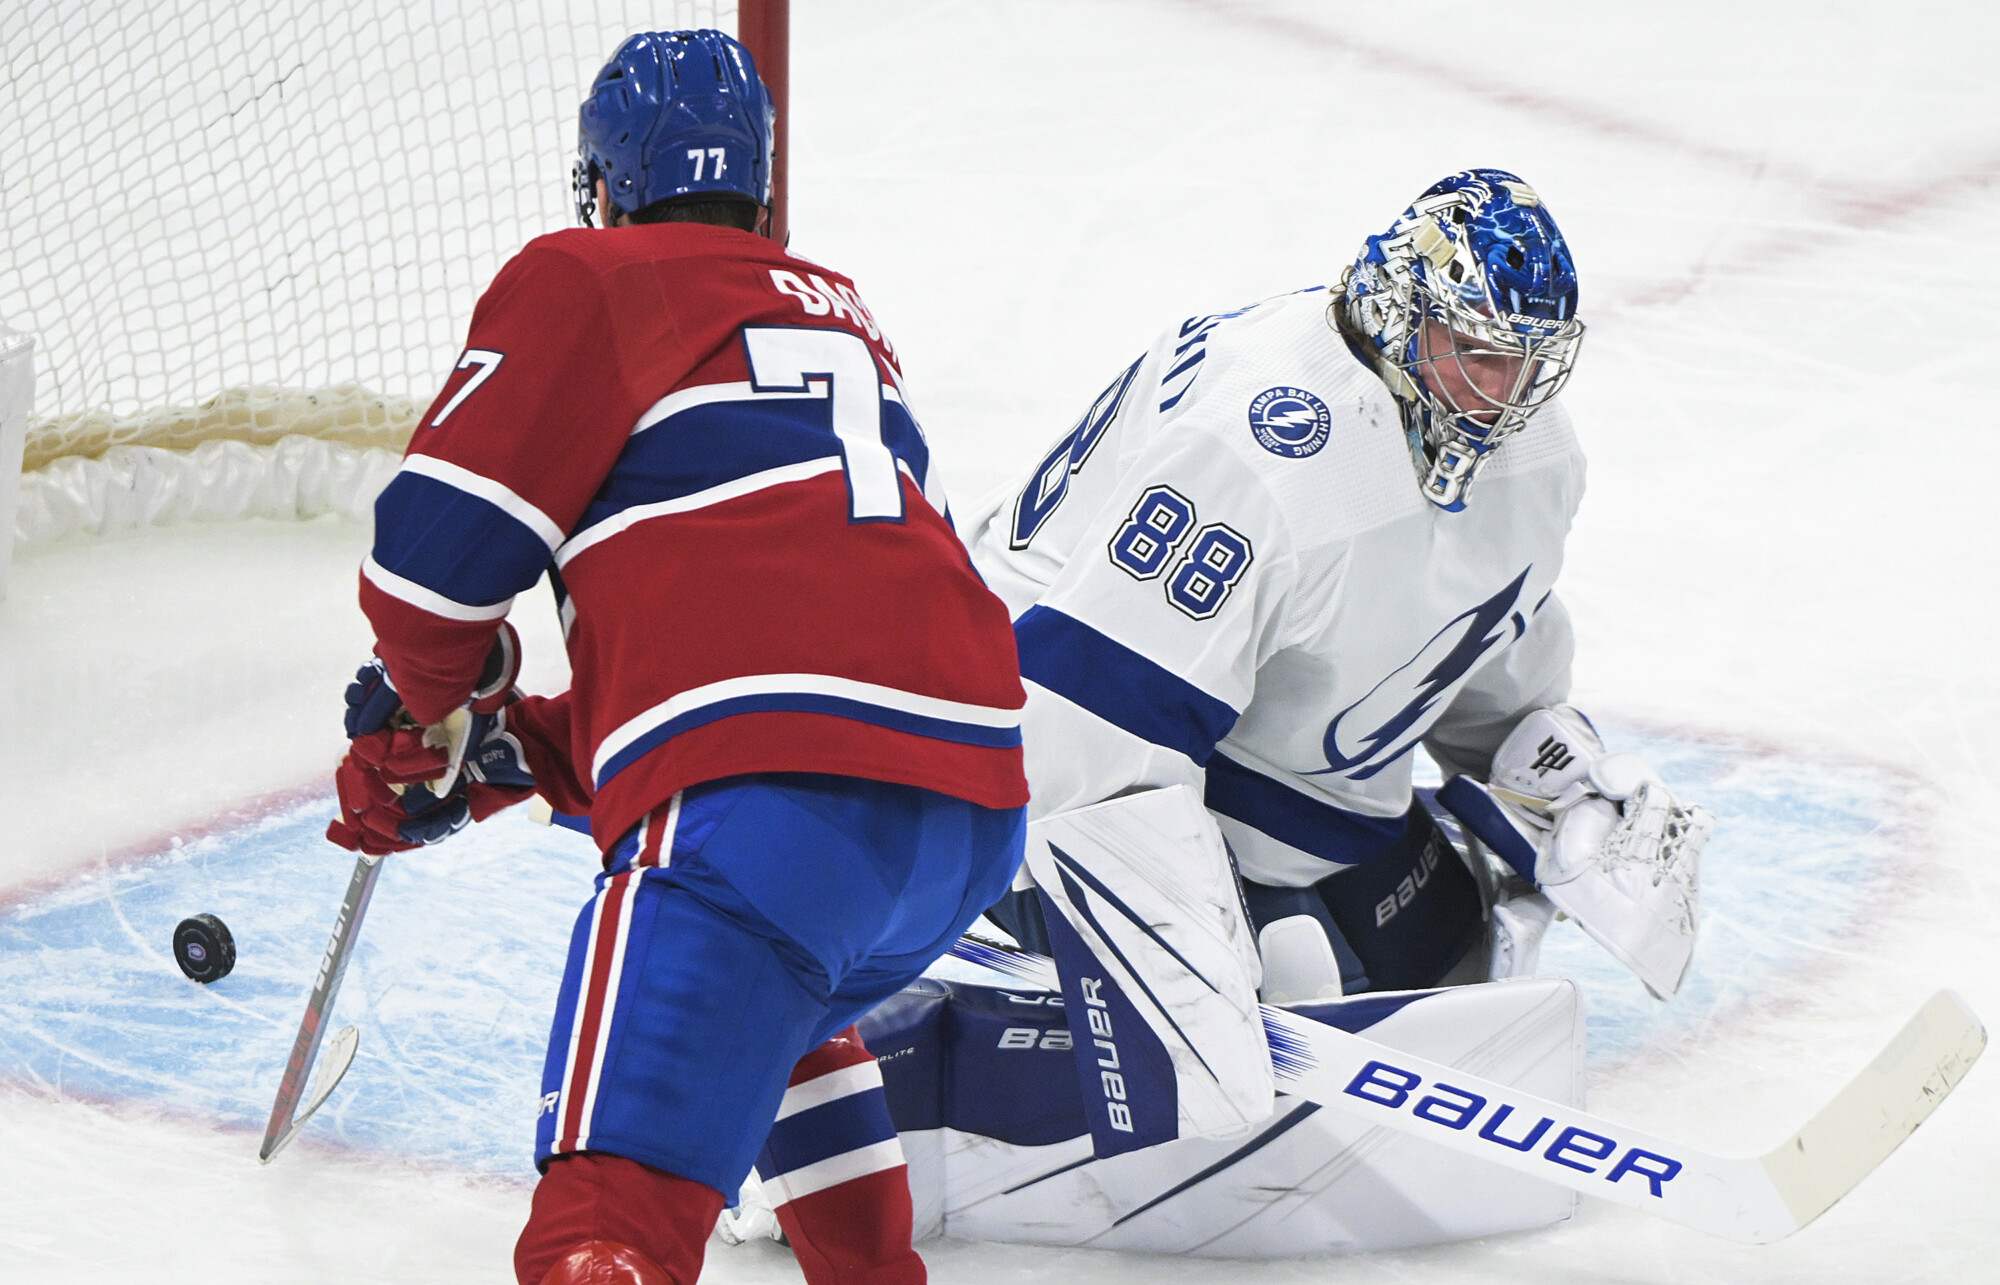 Rangers-Hurricanes series getting chippy heading into Game 4